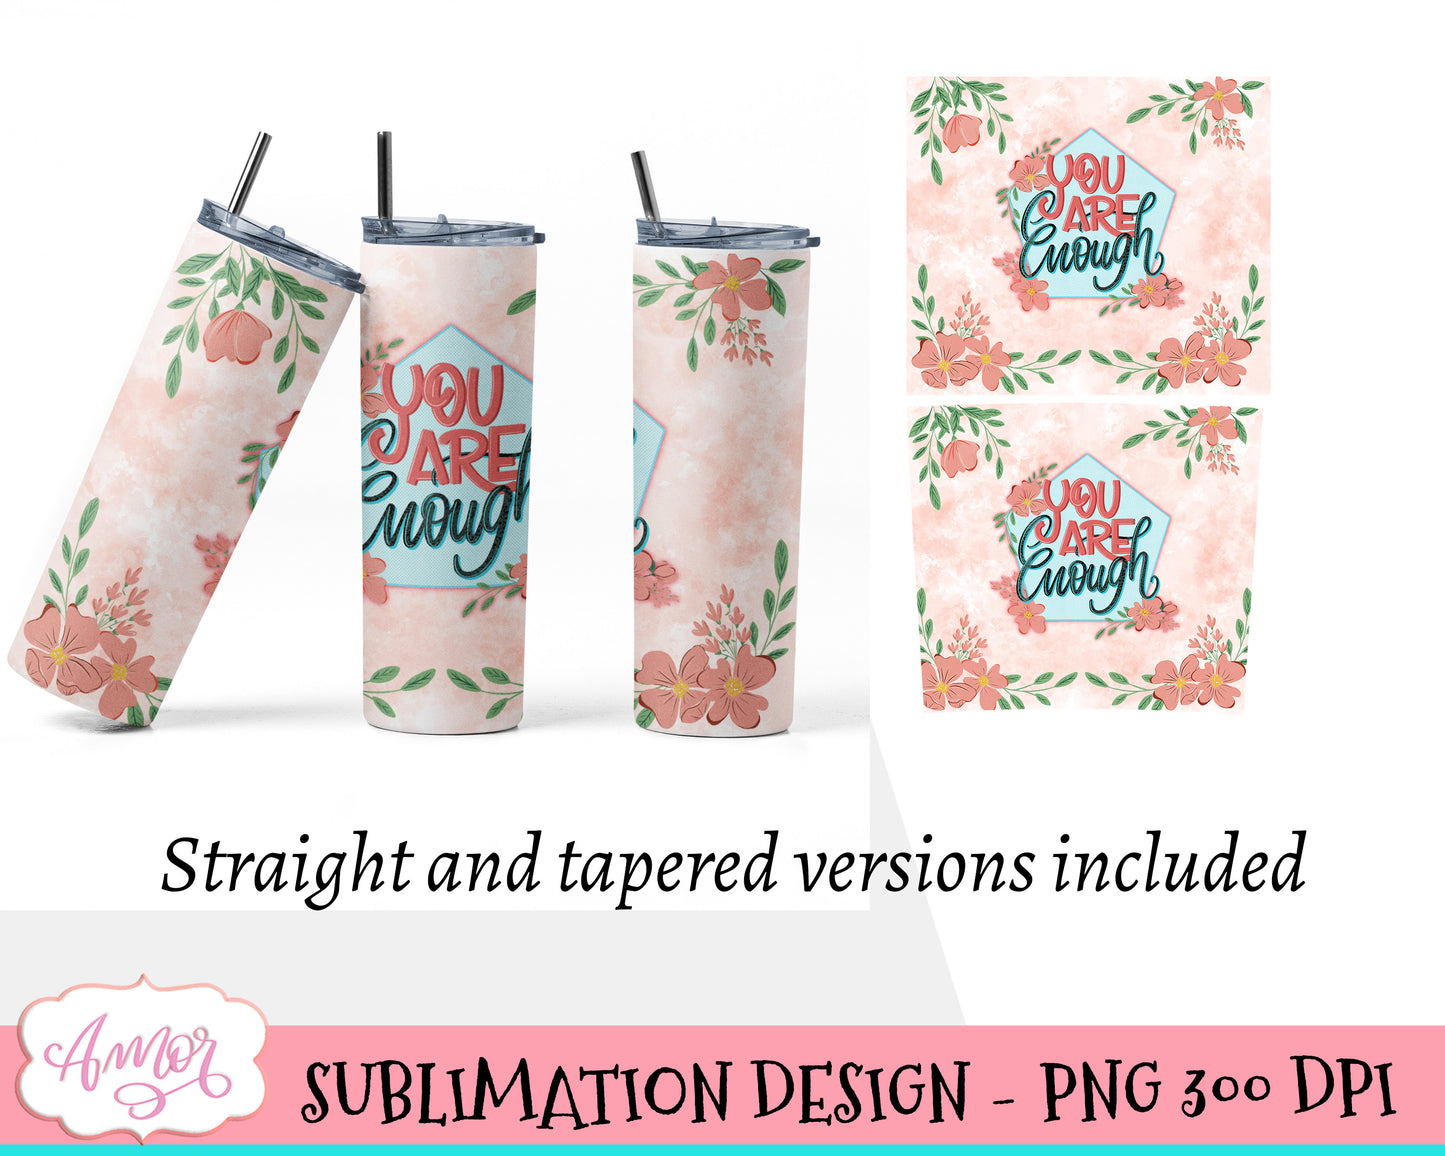 You are enough Tumbler Wrap for Sublimation